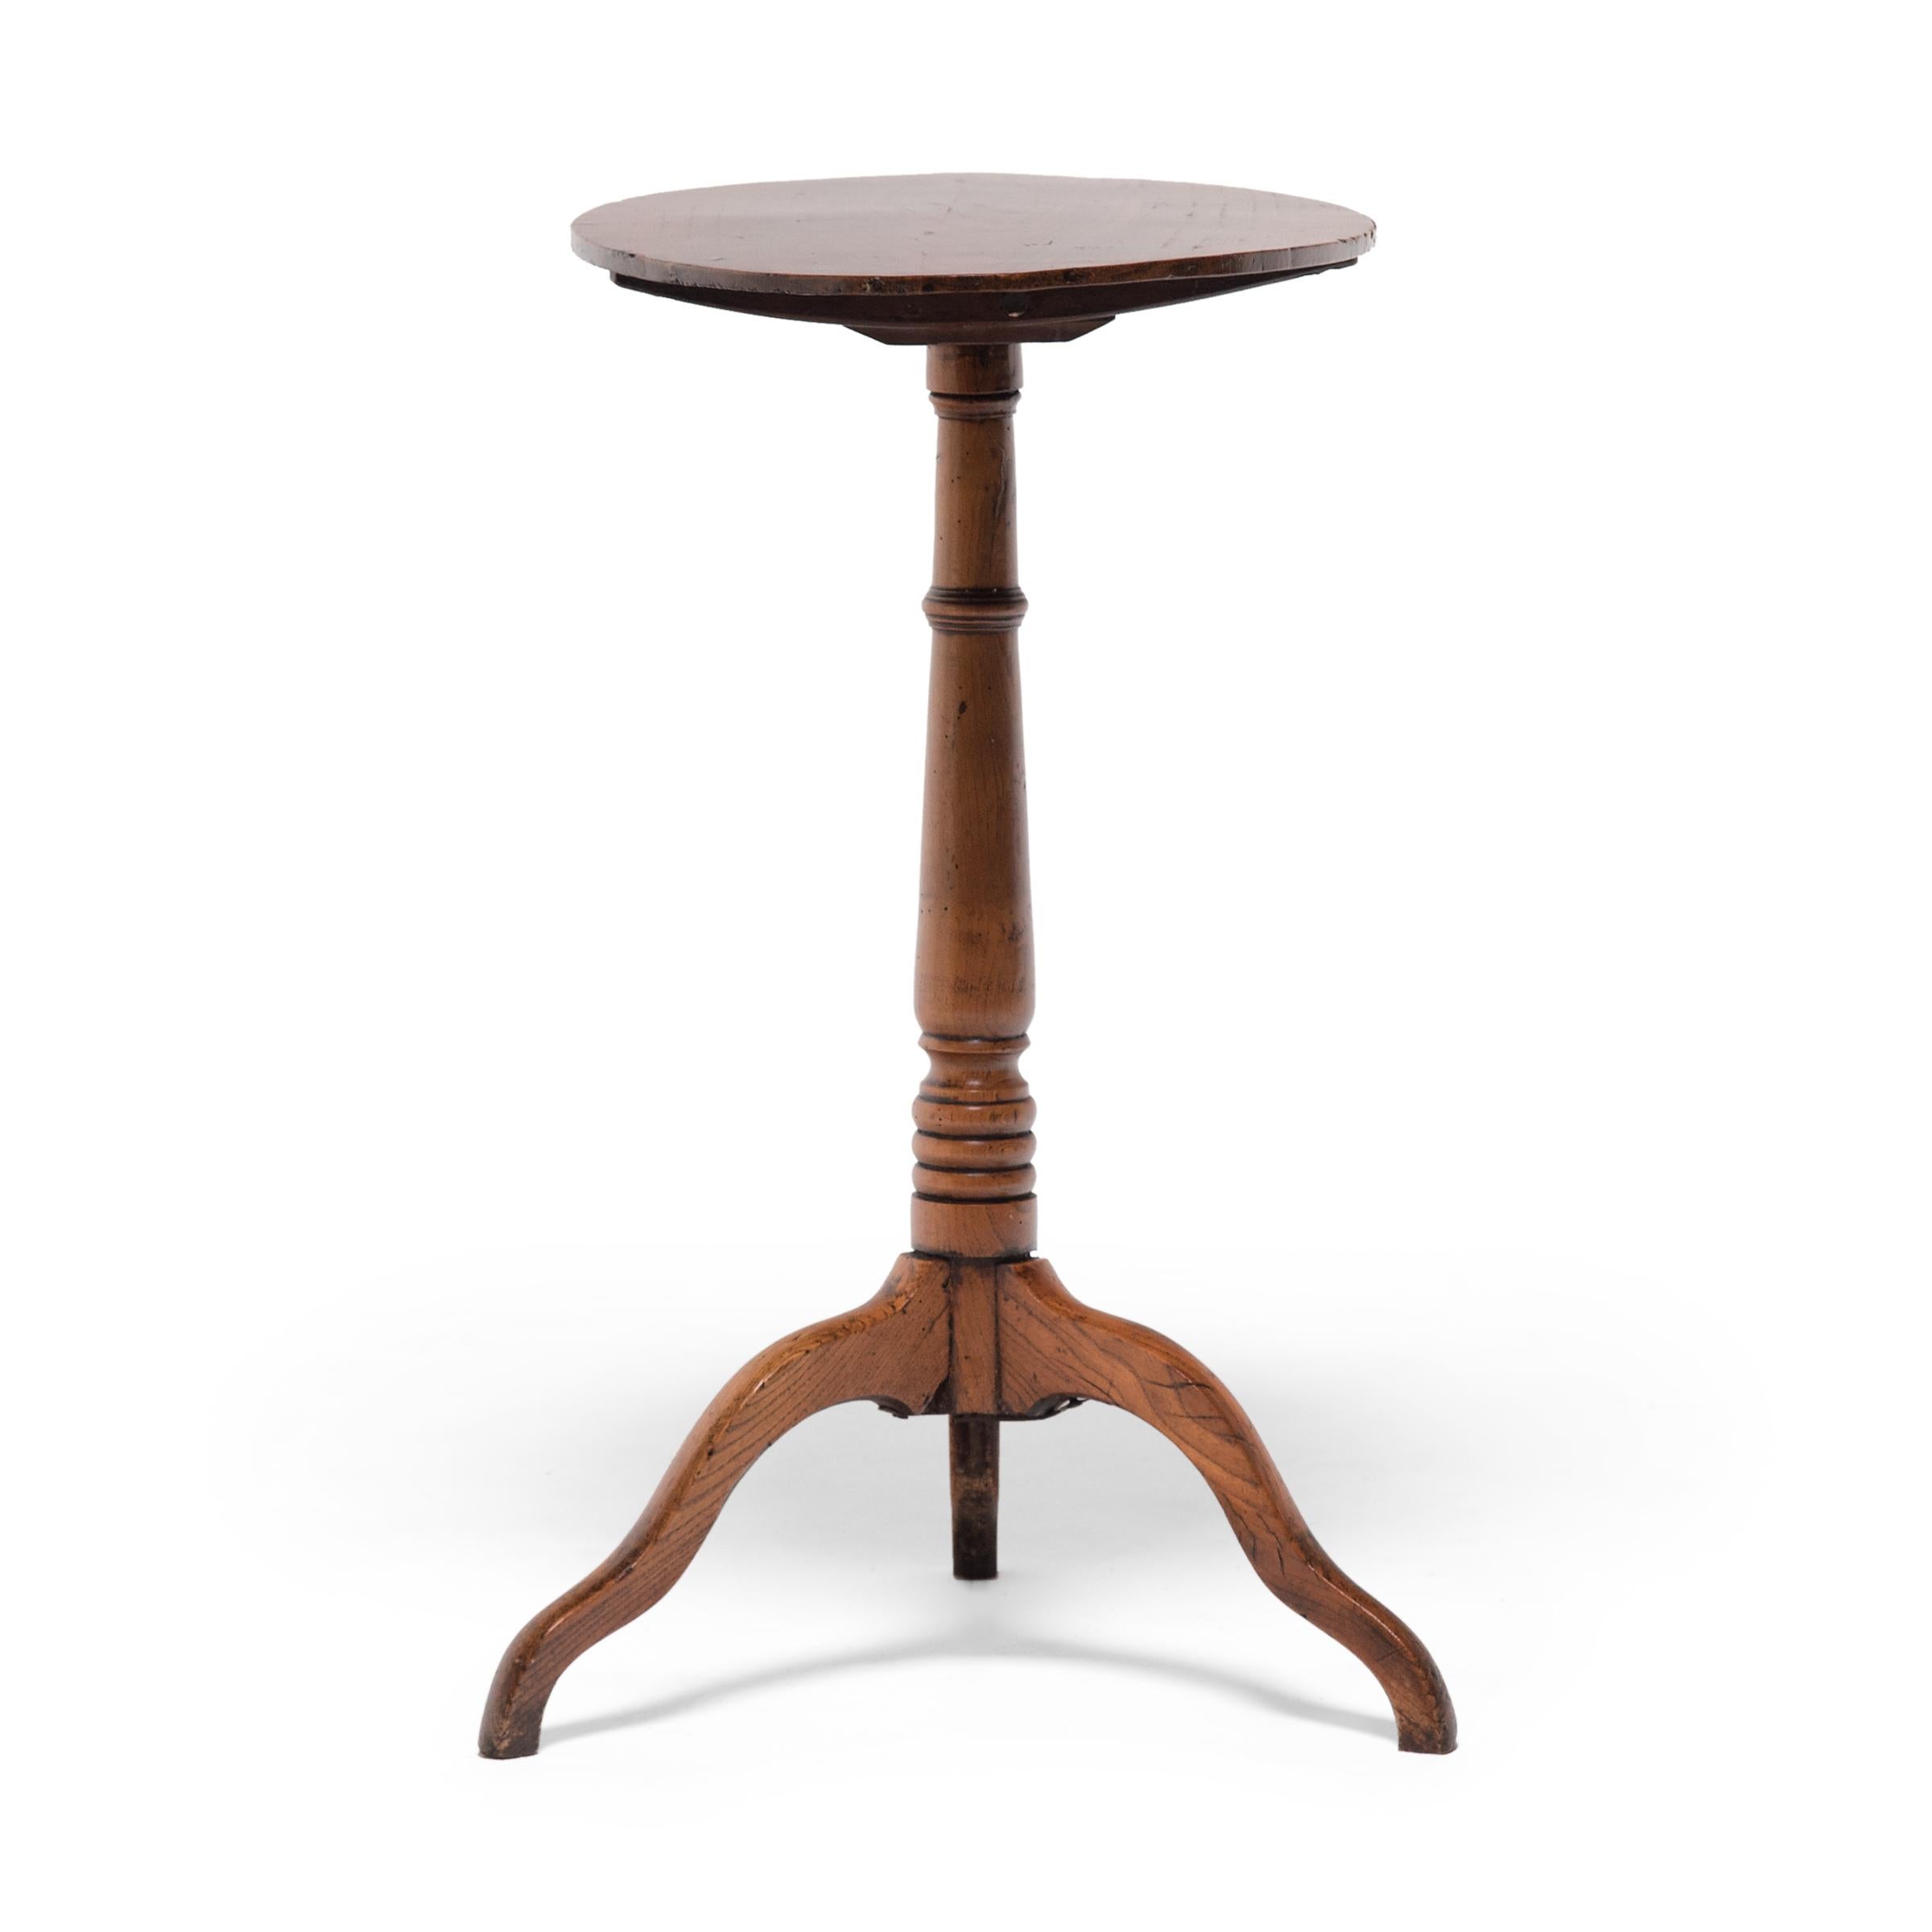 Dated to the 19th century, this oval tea table is a lightweight variation of the classic English pedestal table. First popularized during the Georgian period (1714-1837), pedestal tables such as this were used for taking hot drinks and featured a